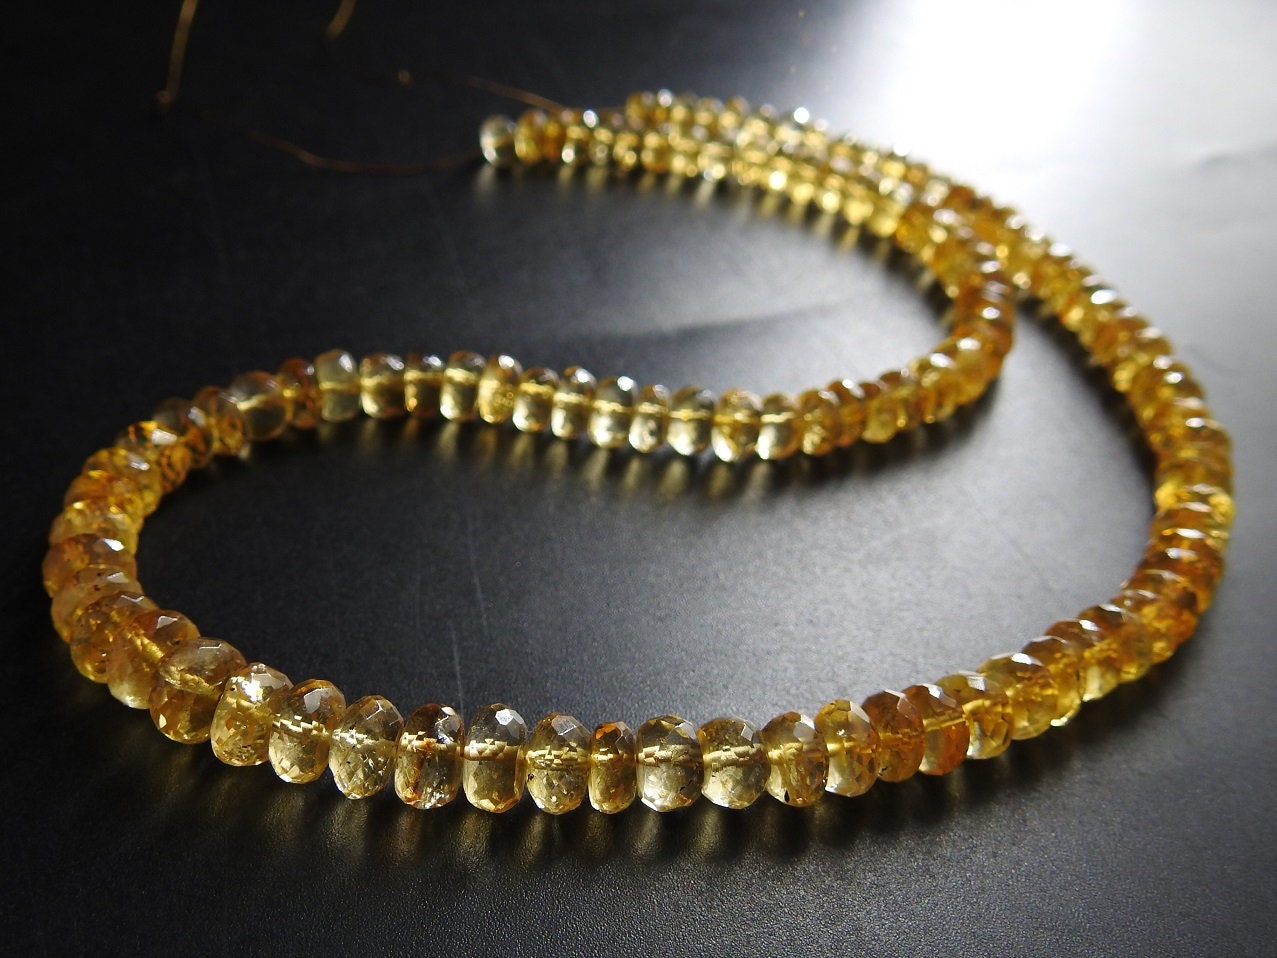 Citrine Faceted Roundel Beads,Loose Stone,Quartz,Yellow Color,Minerals Gemstone,For Jewelry Making 100%Natural 8Inch 5To6MM Approx (pme)B11 | Save 33% - Rajasthan Living 10